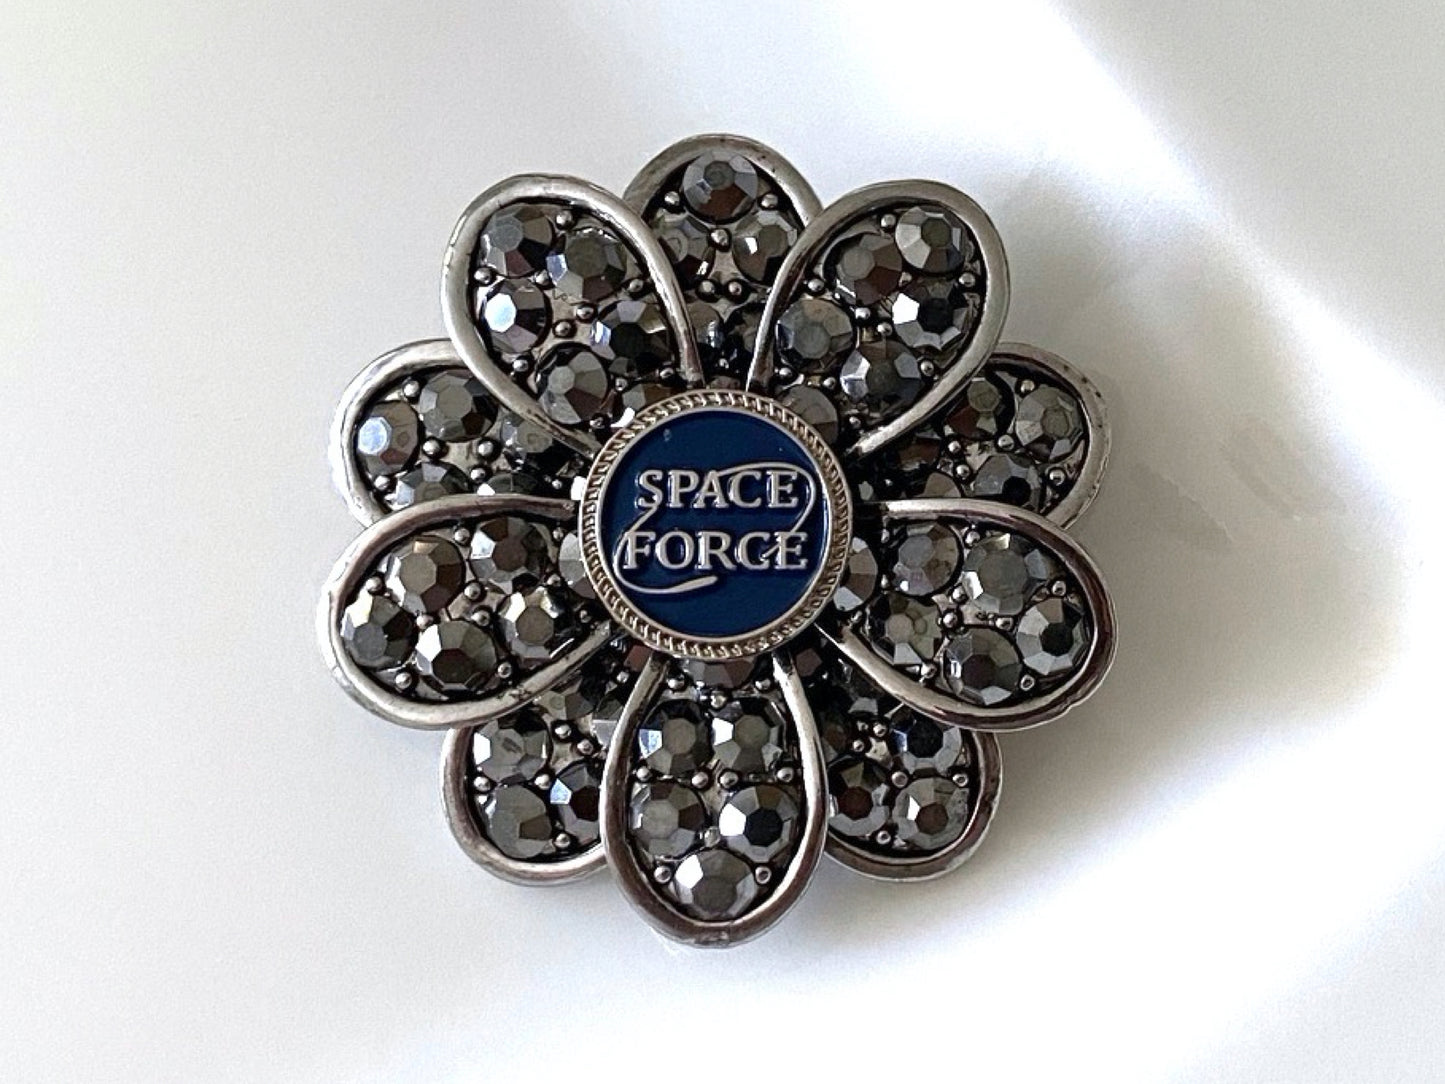 Space Force Brooch